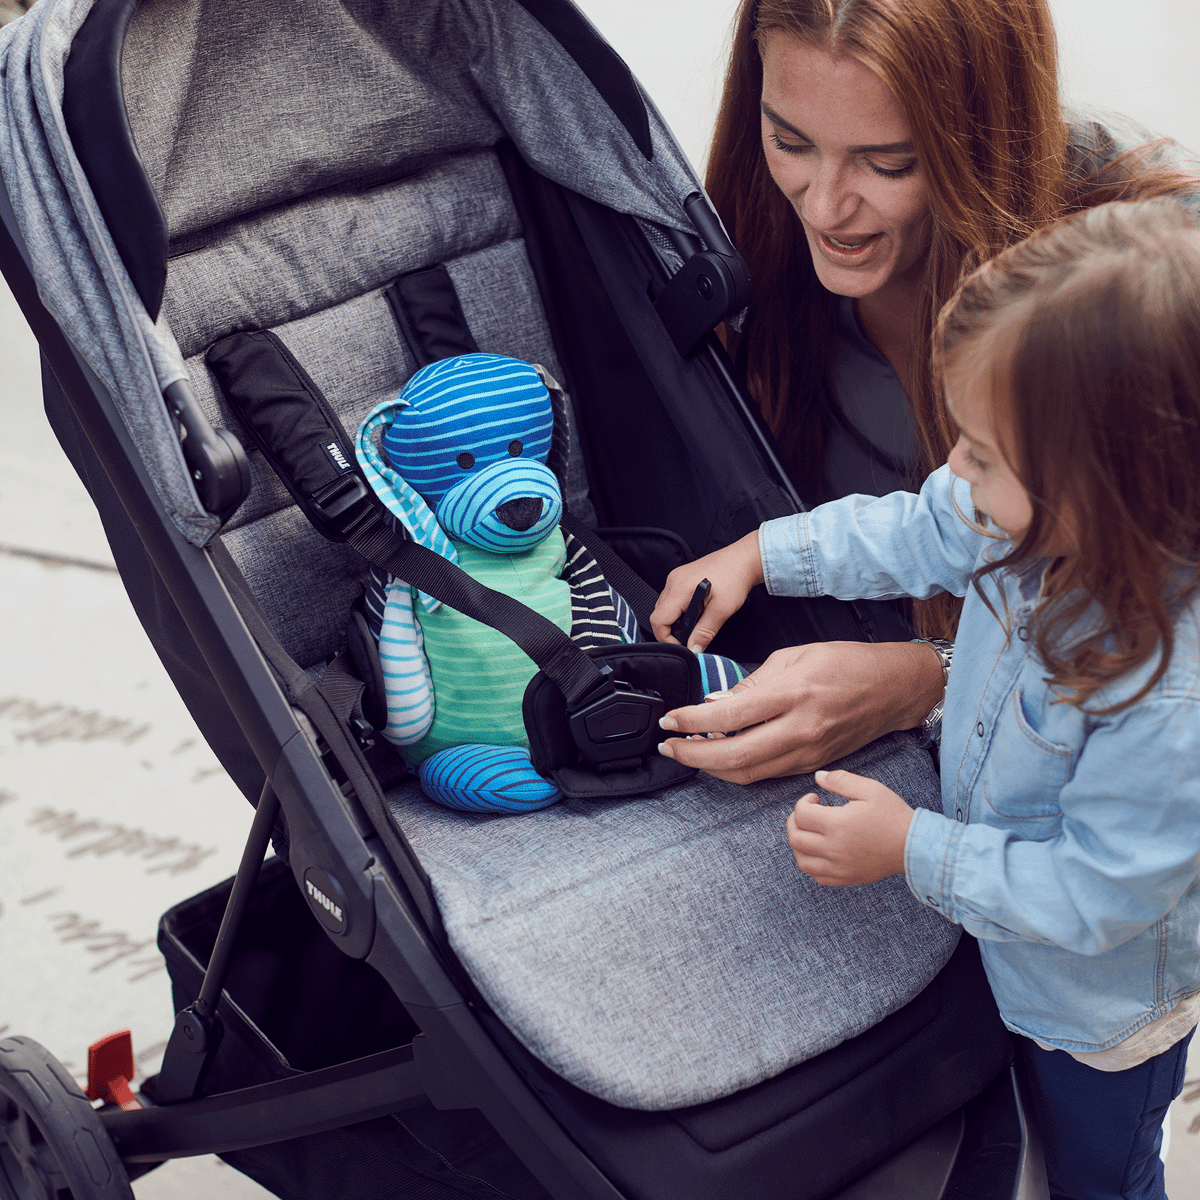 A woman kneels next to her toddler who straps a toy into a gray stroller with a gray Thule Seat Liner.